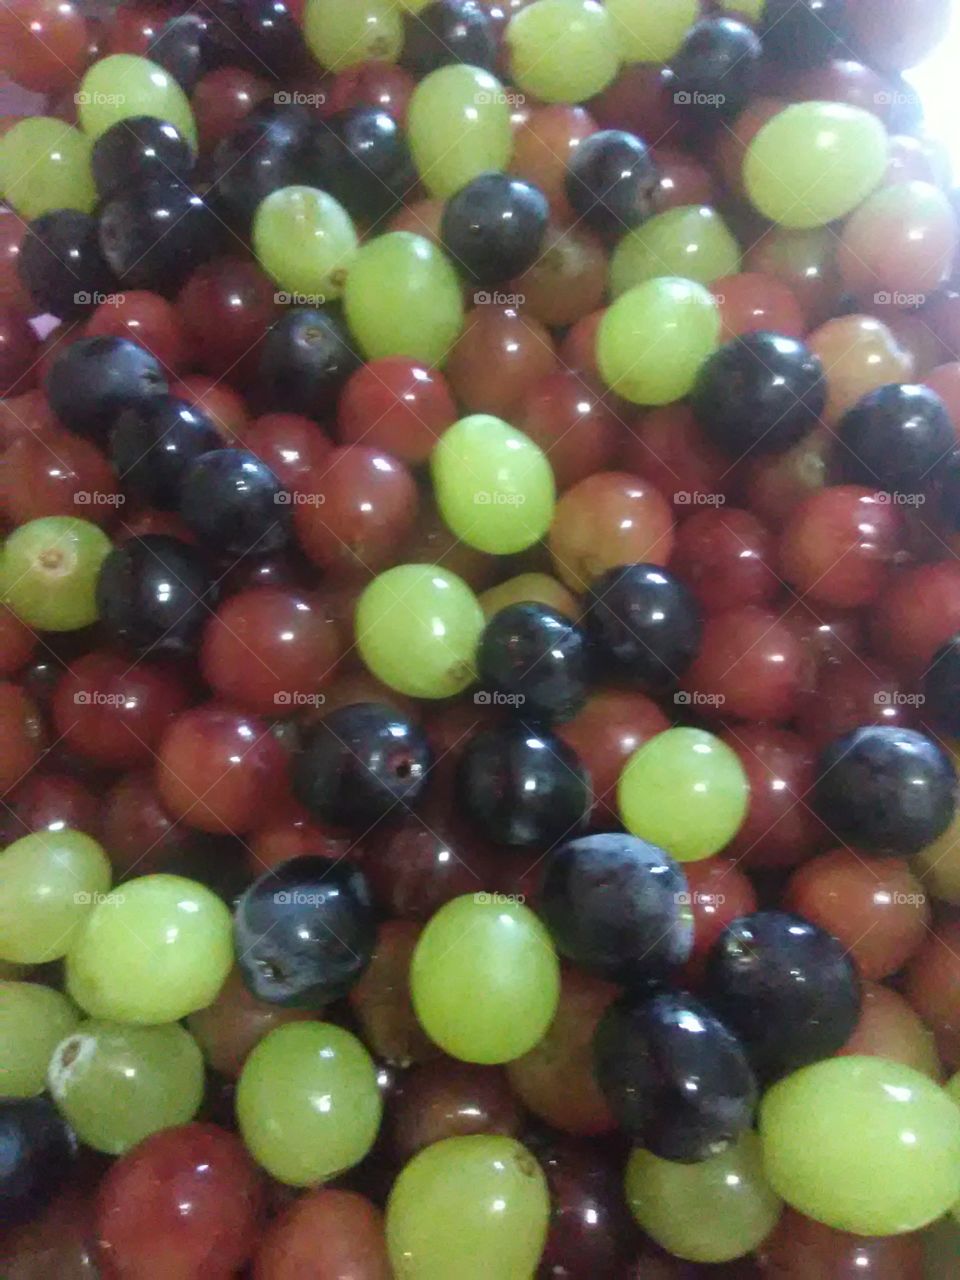 a beautiful vairity of purple and white grapes so freaking fresh and delicious 👌😍